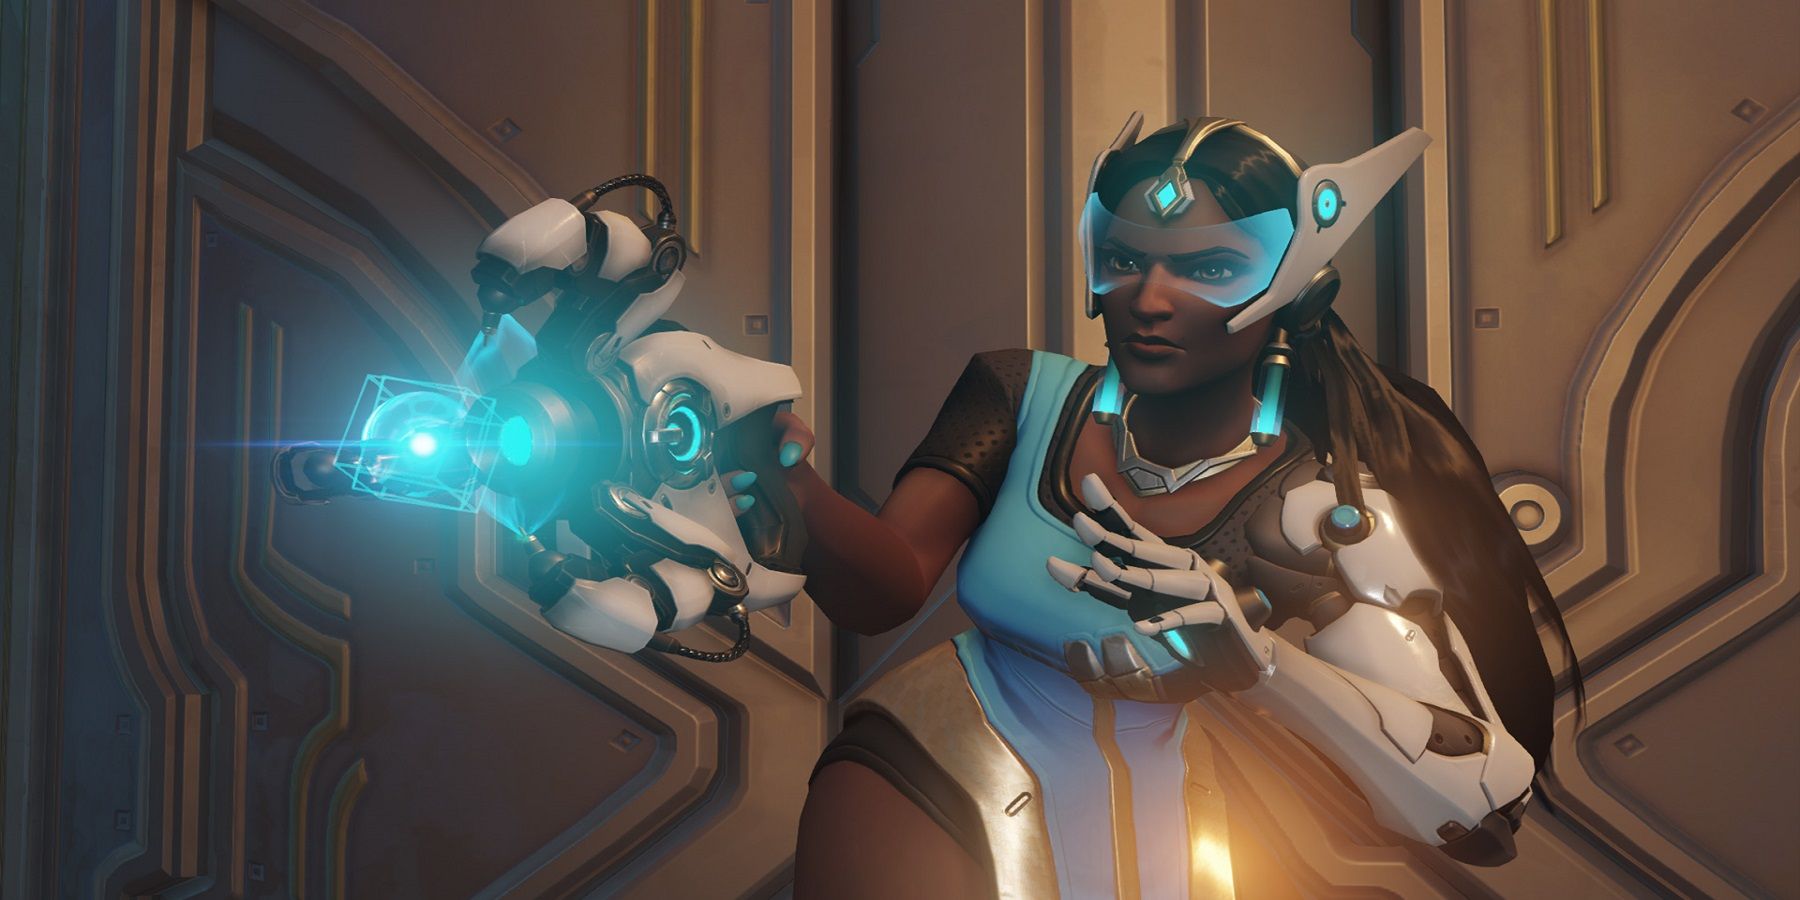 A clip on social media gives Overwatch players flashbacks to the Symmetra meta.